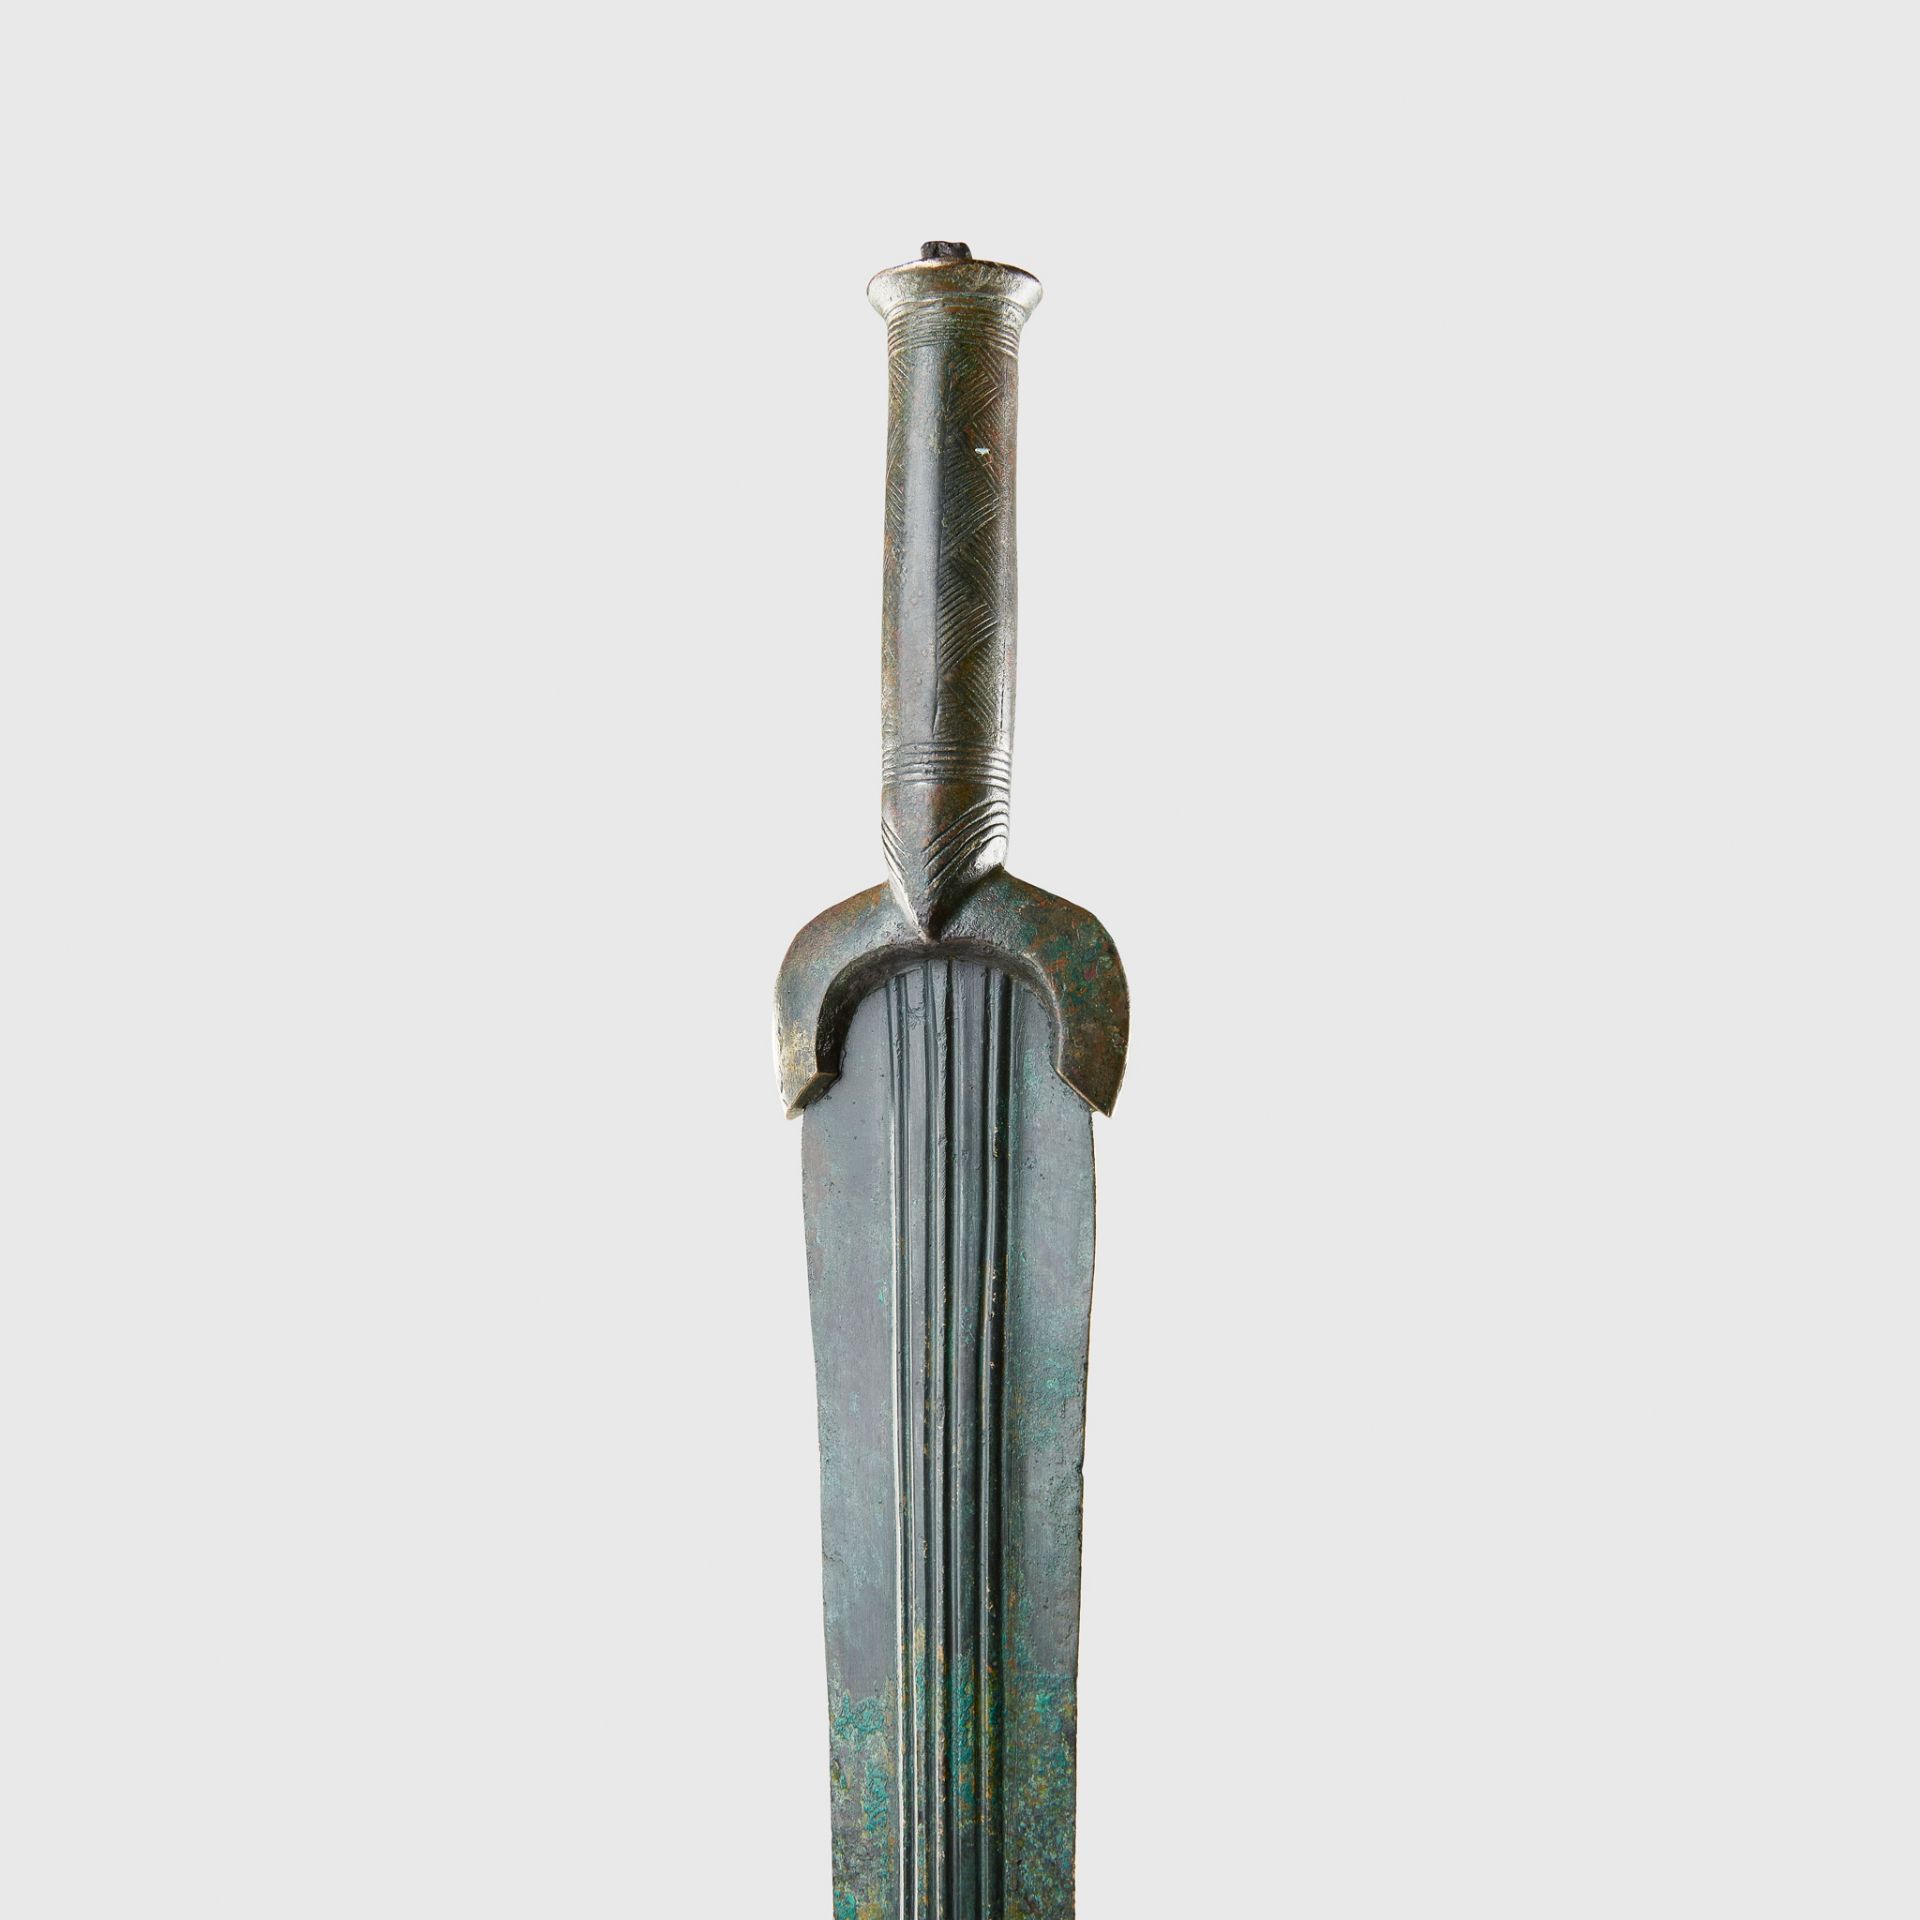 NEAR EASTERN DAGGER AND SWORD NEAR EAST, EARLY FIRST MILLENNIUM B.C. - Image 3 of 3